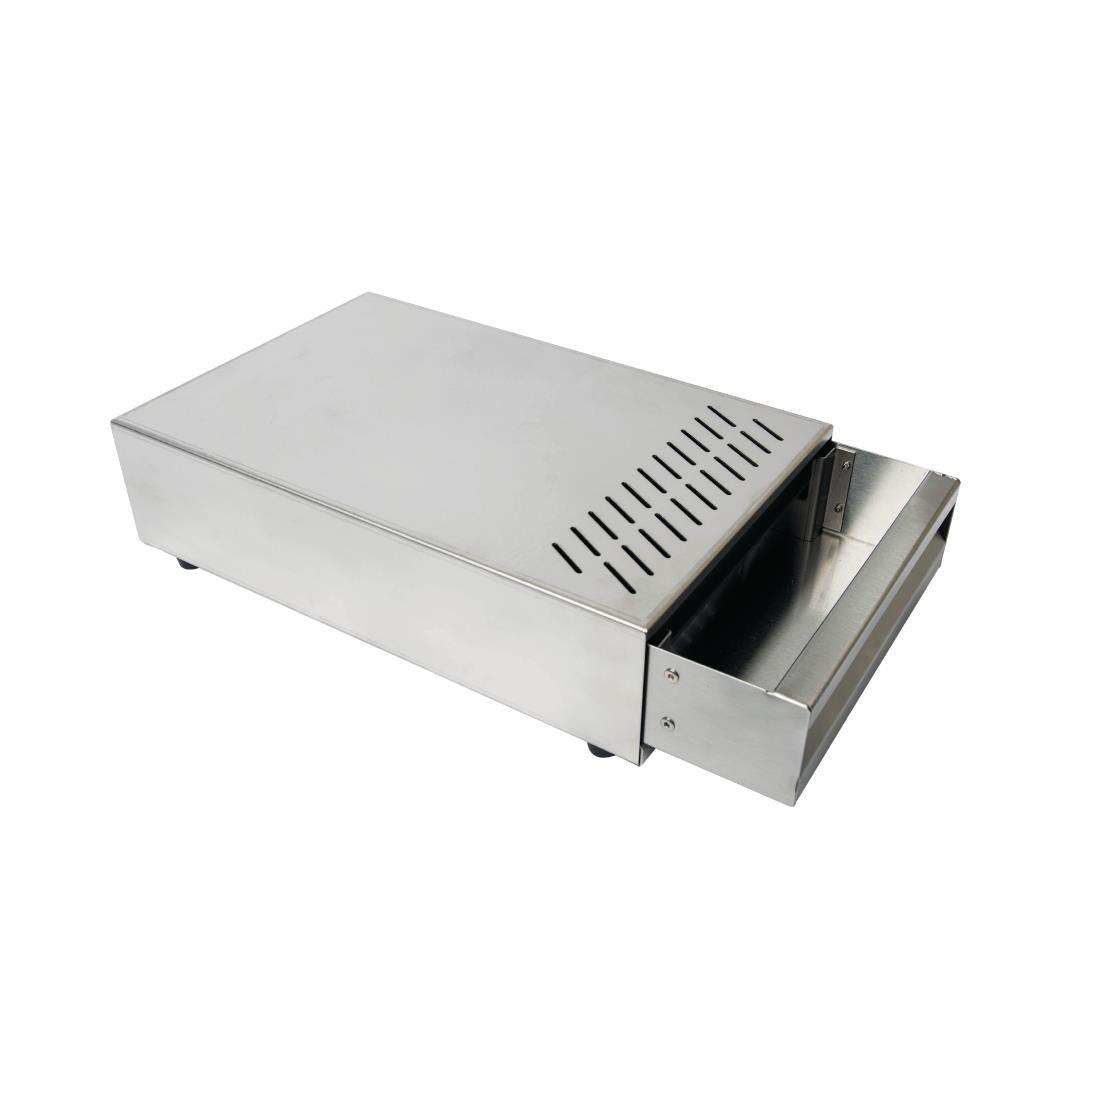 Premium Stainless Steel Knock Out Box - HC559  - 6